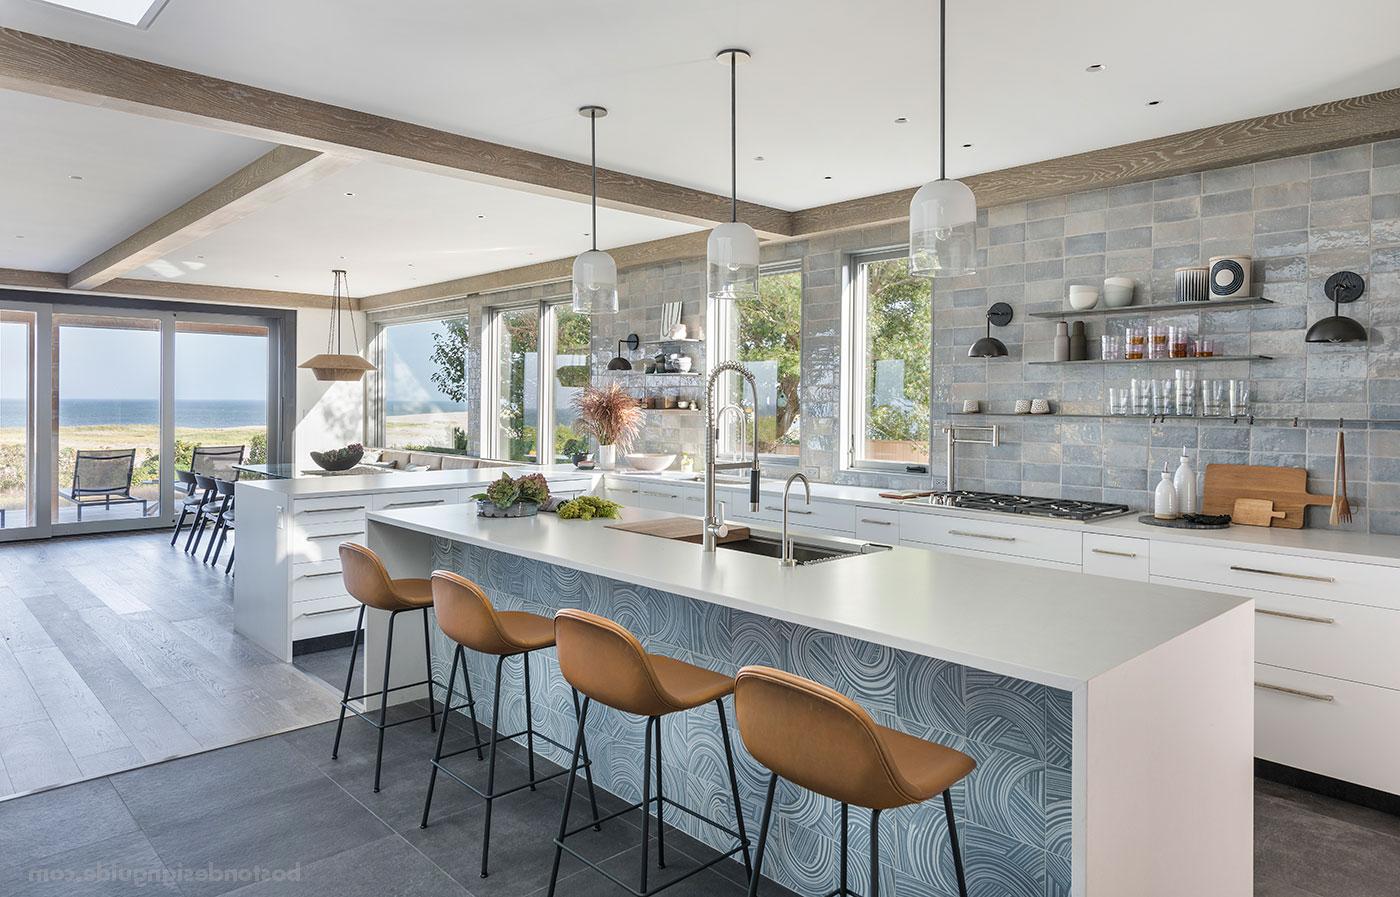 Modern kitchen for a beachfront property with cabinetry by Kochman Reidt + Haigh橱柜制造商, S构造.J. Overstreet